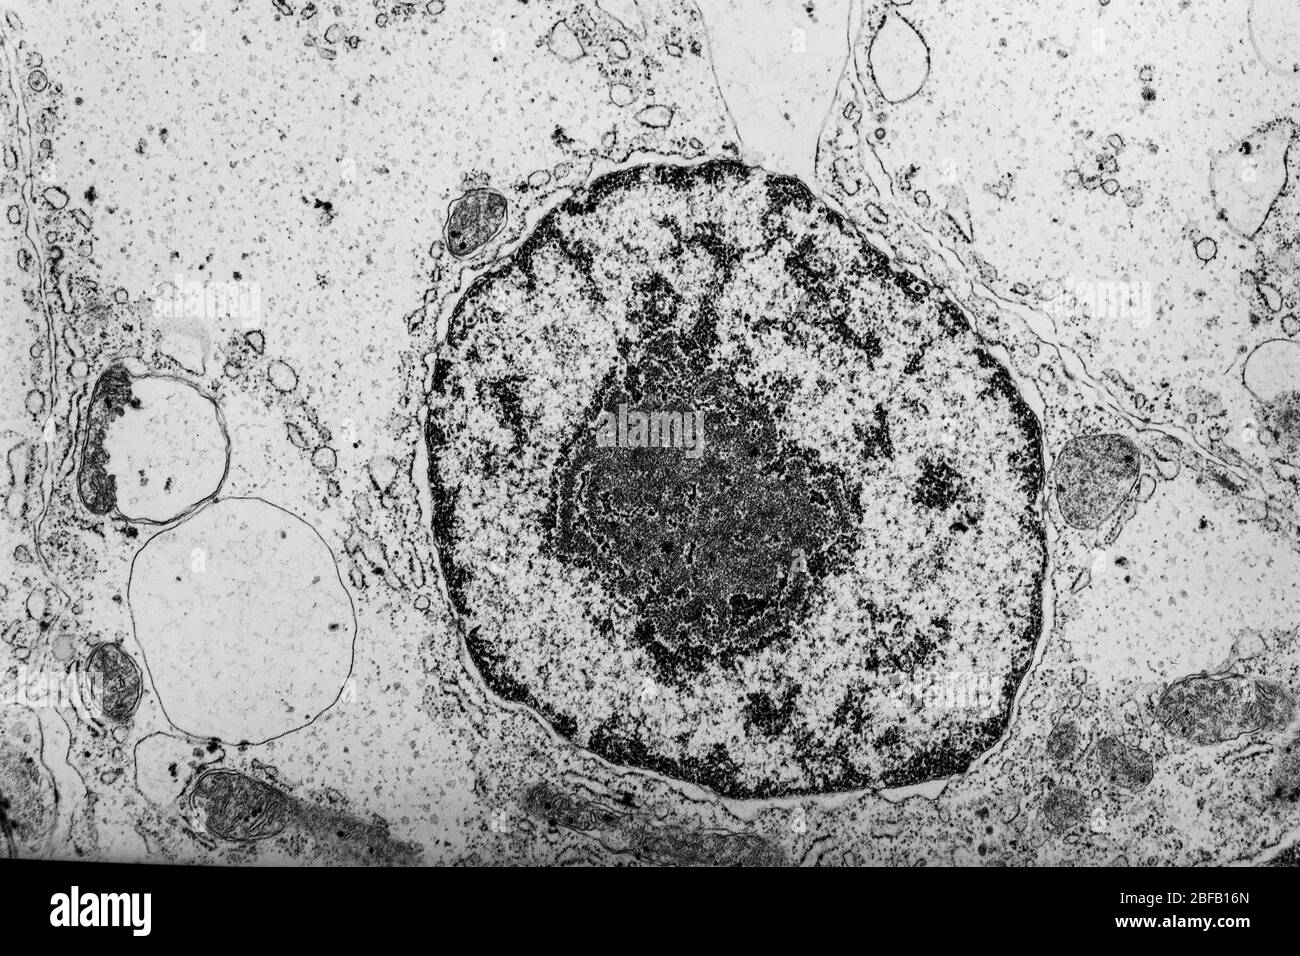 Cell nucleus with organelles in the electron microscope 50,000x Stock Photo  - Alamy